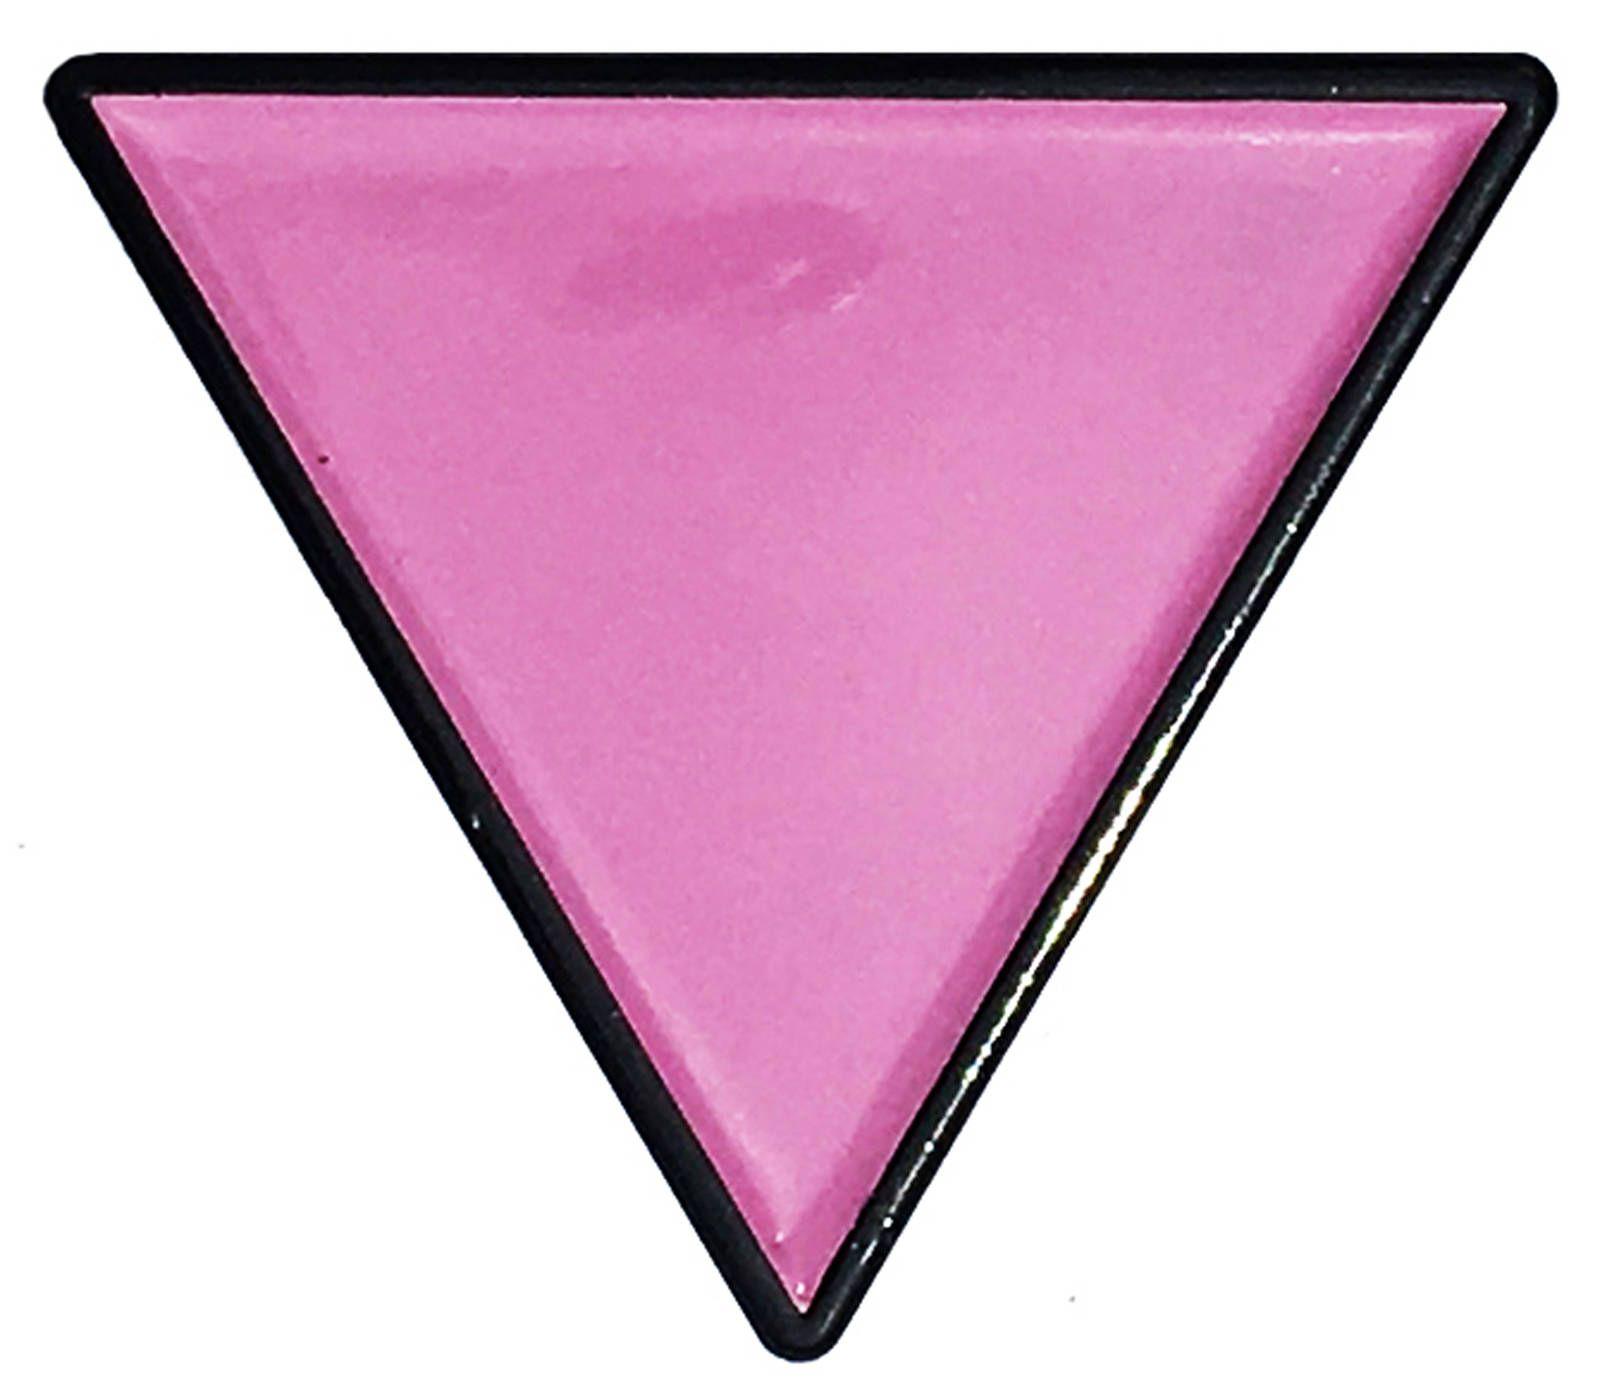 LGBT Triangle Logo - Pink Triangle - Gay and Lesbian LGBT Support Pride Symbol Enamel Pin ...